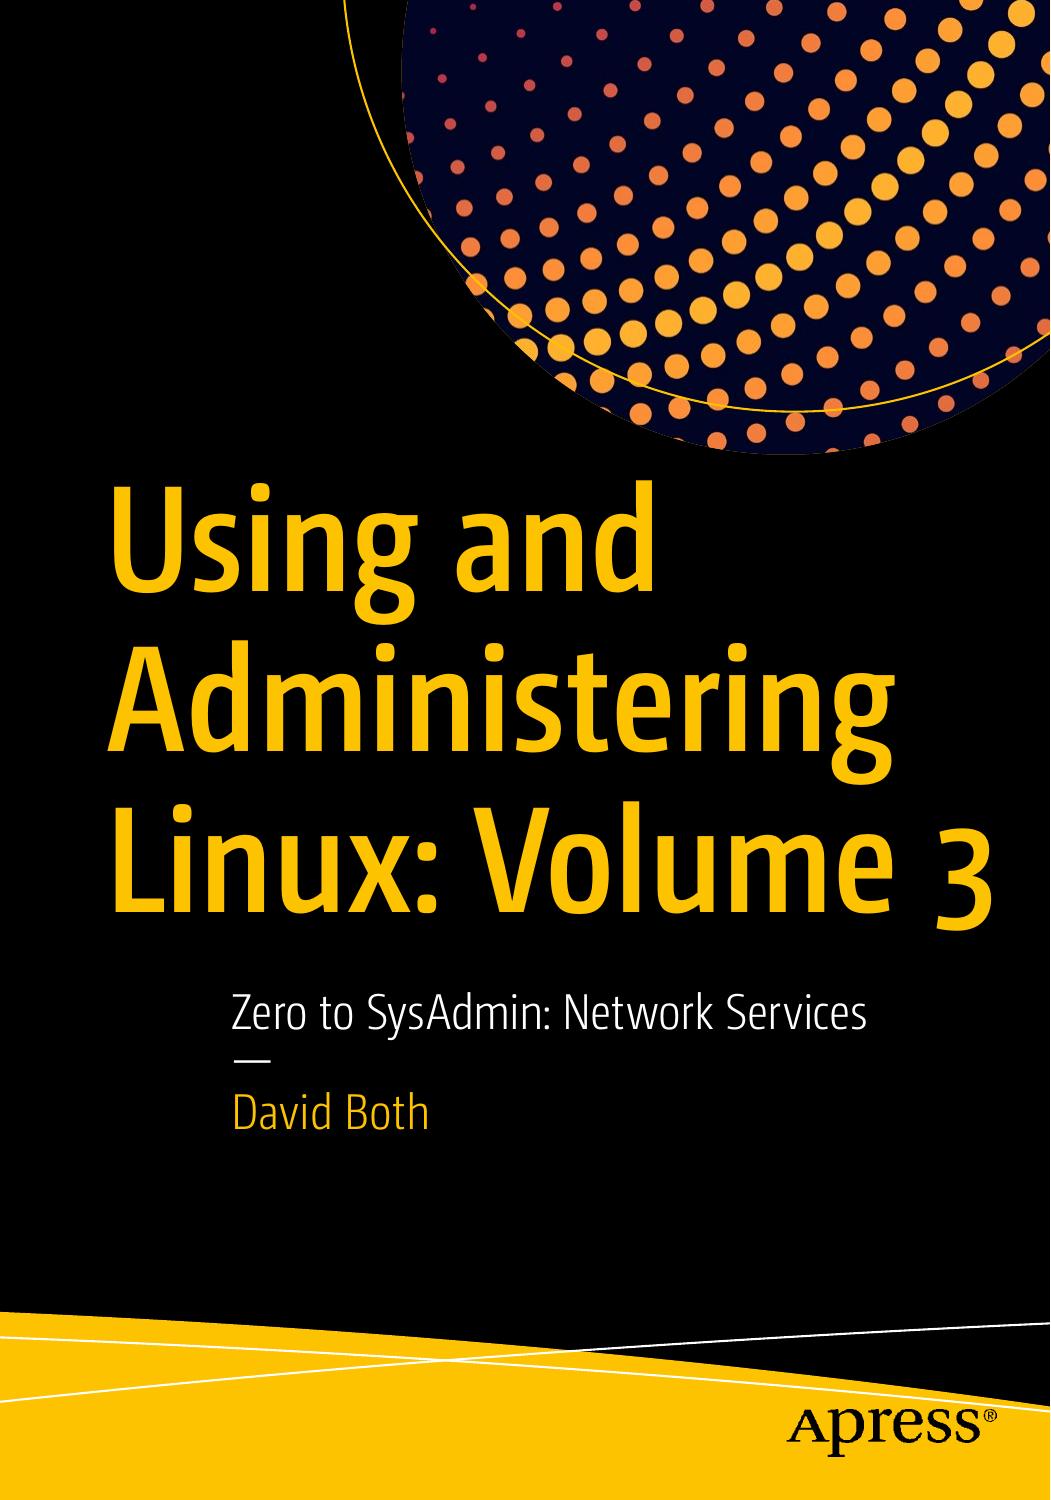 Using and Administering Linux: Volume 3: Zero to SysAdmin: Network Services by David Both